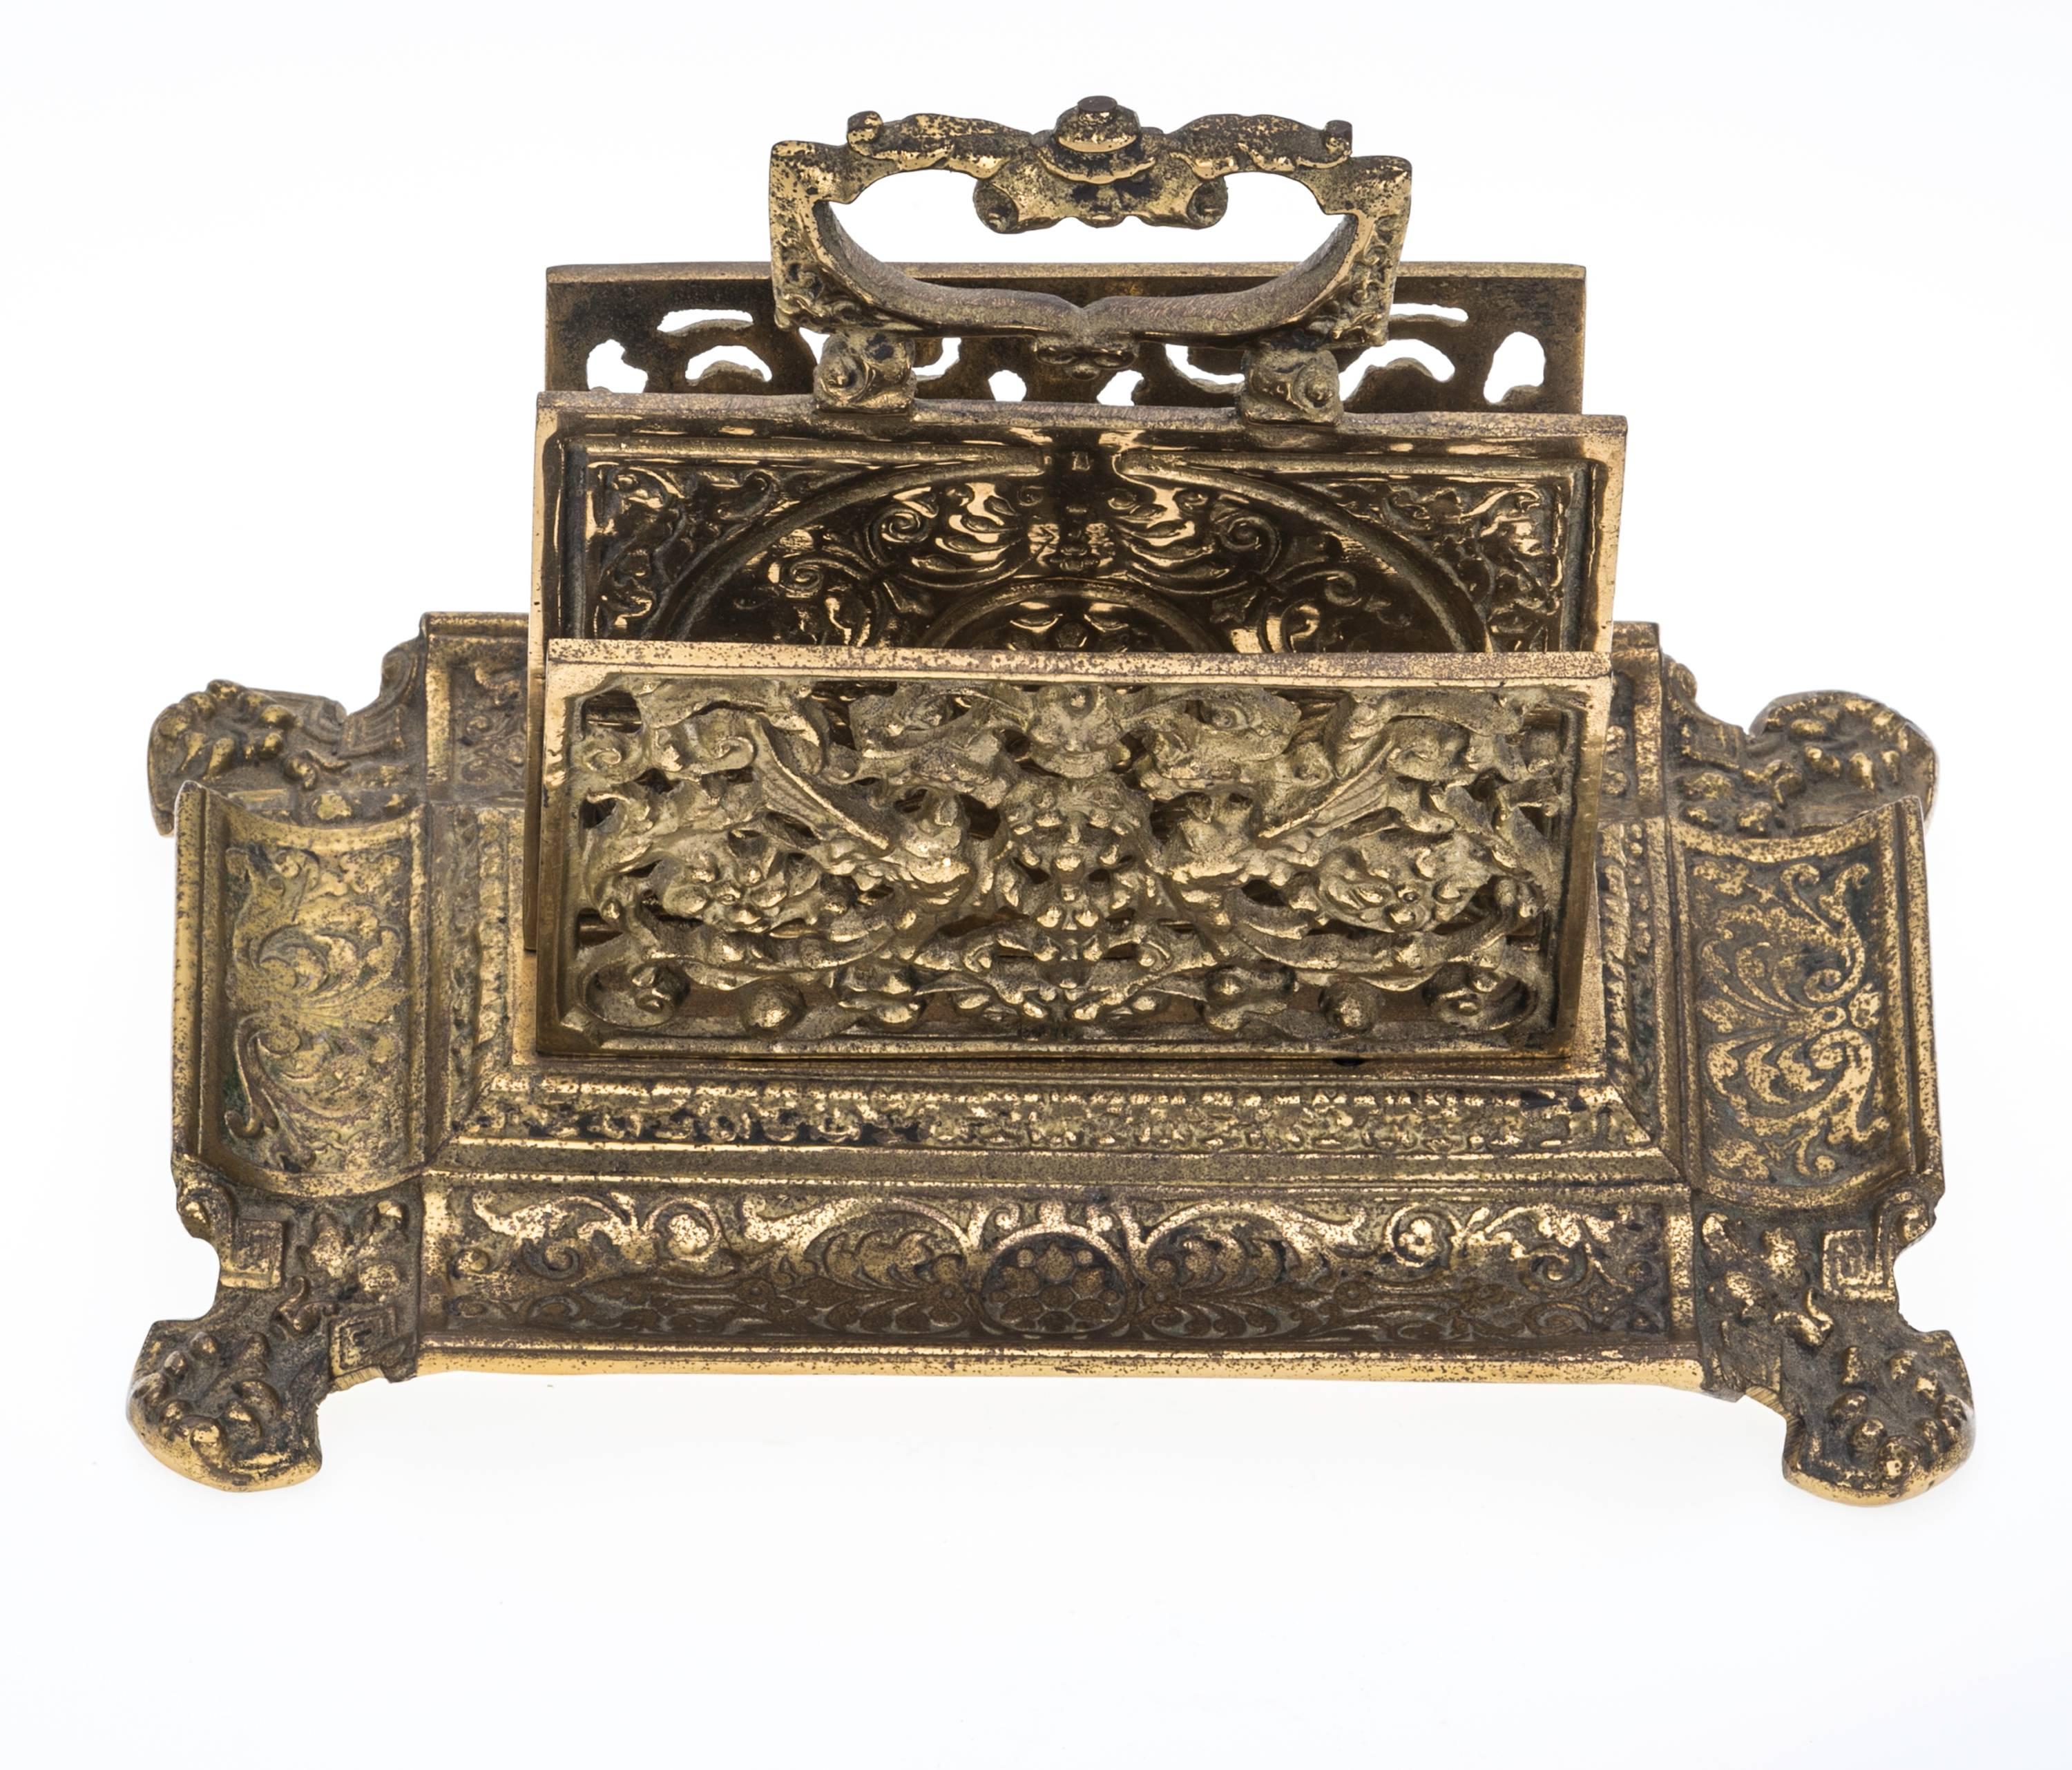 French antique brass letter holder. Beautiful panels of cast brass with divided compartments for letters, ample handle in the mid section. Each sides have pen wells. Wonderful addition for your desk.